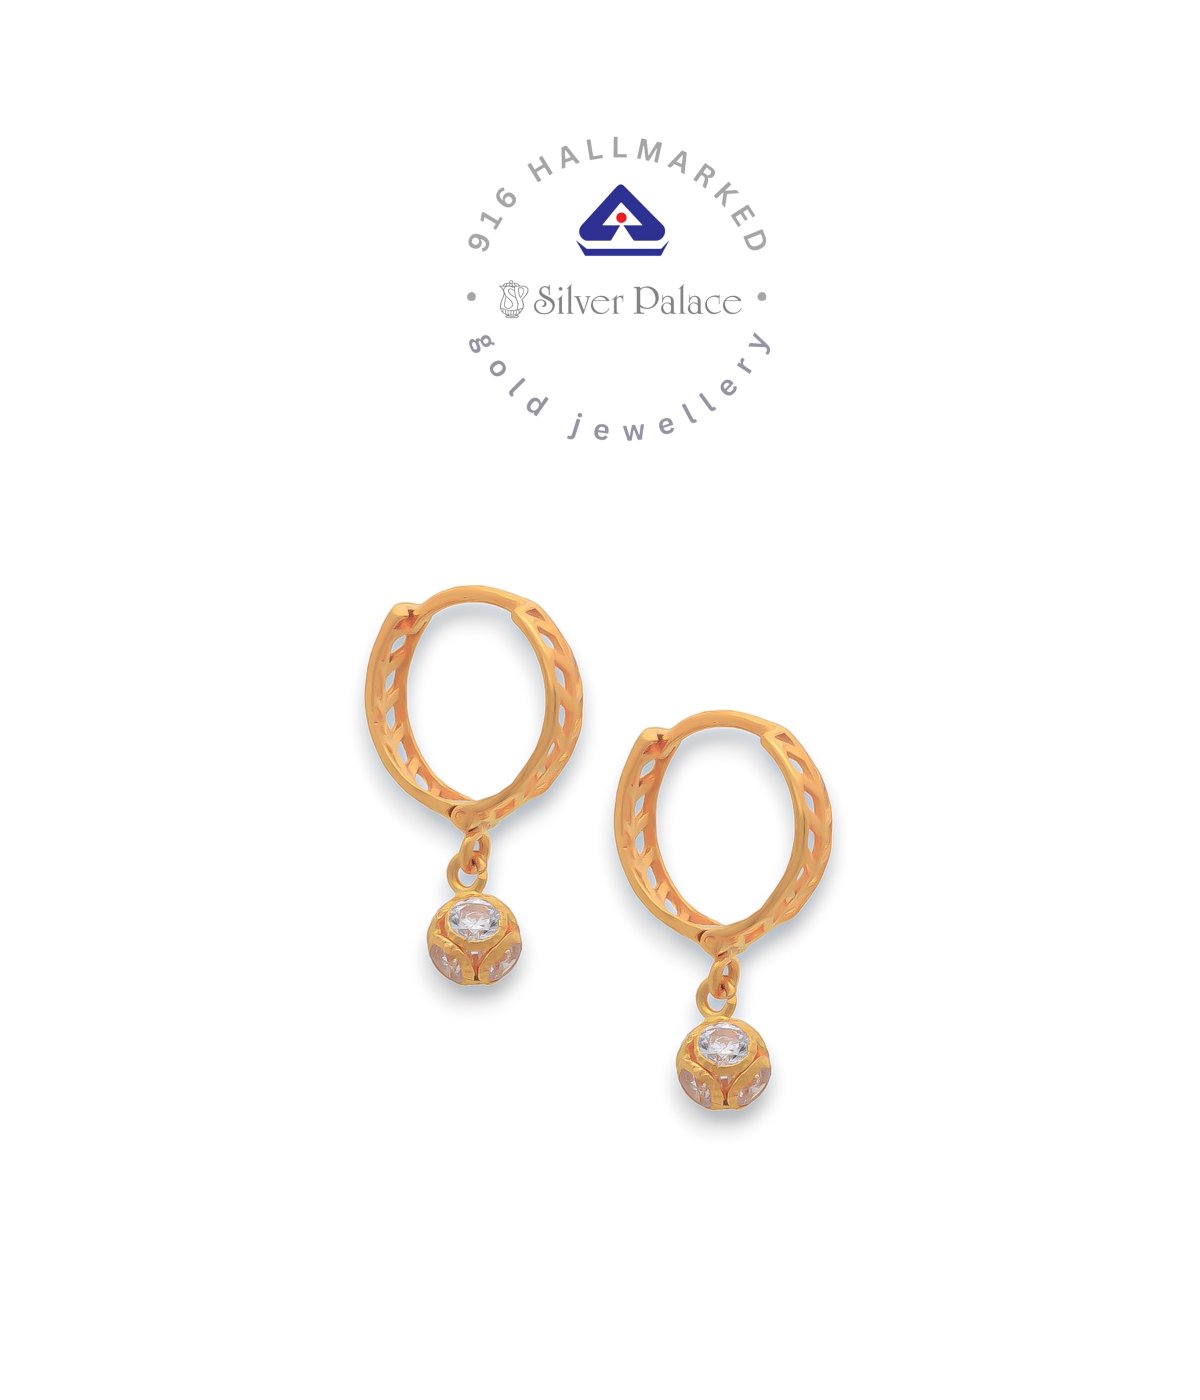  Kanche Collections 916 Pure Gold Stylish bali Earr Hoops With White Stone Studded Drop design For Girls